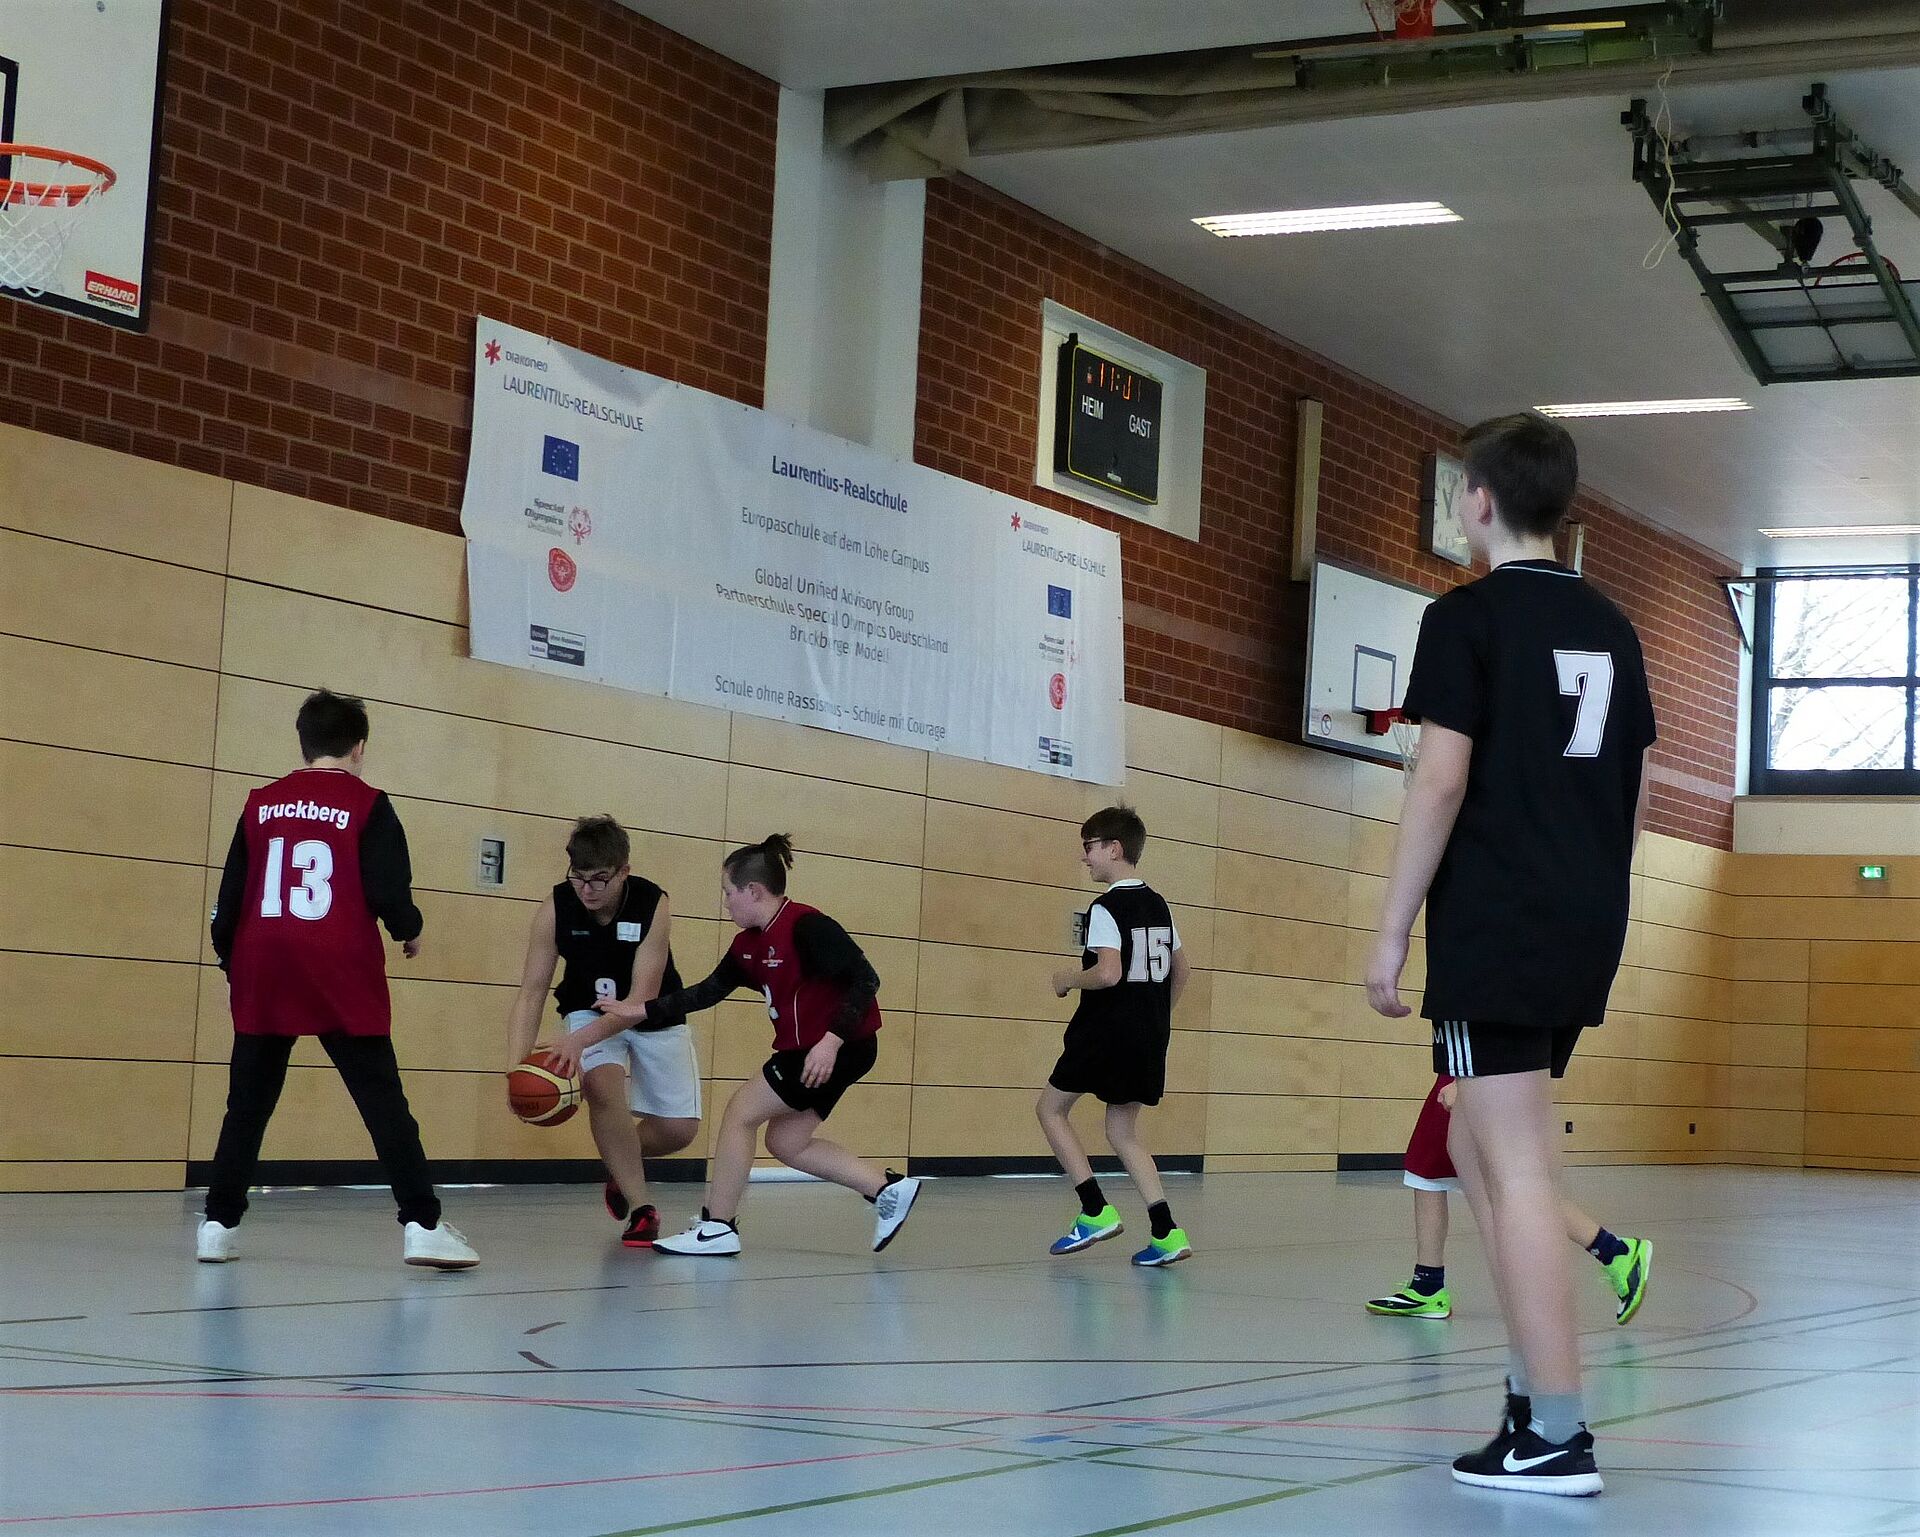 Erstes unified 3x3 Basketball Turnier